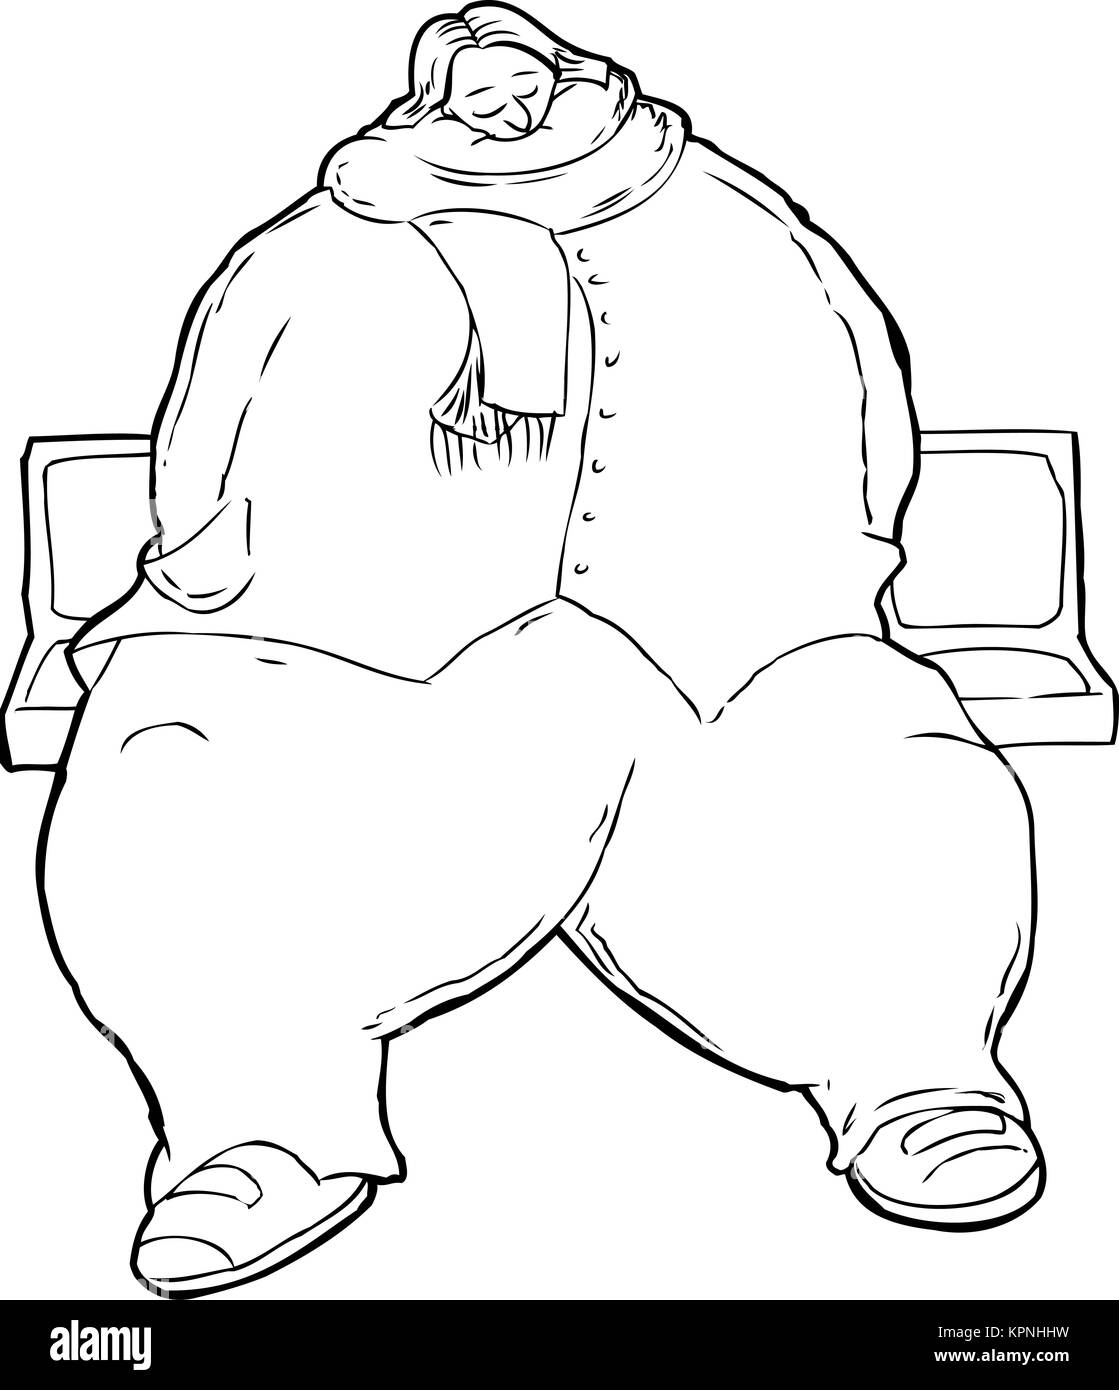 Outline cartoon of obese woman sitting on bus seat Stock Photo